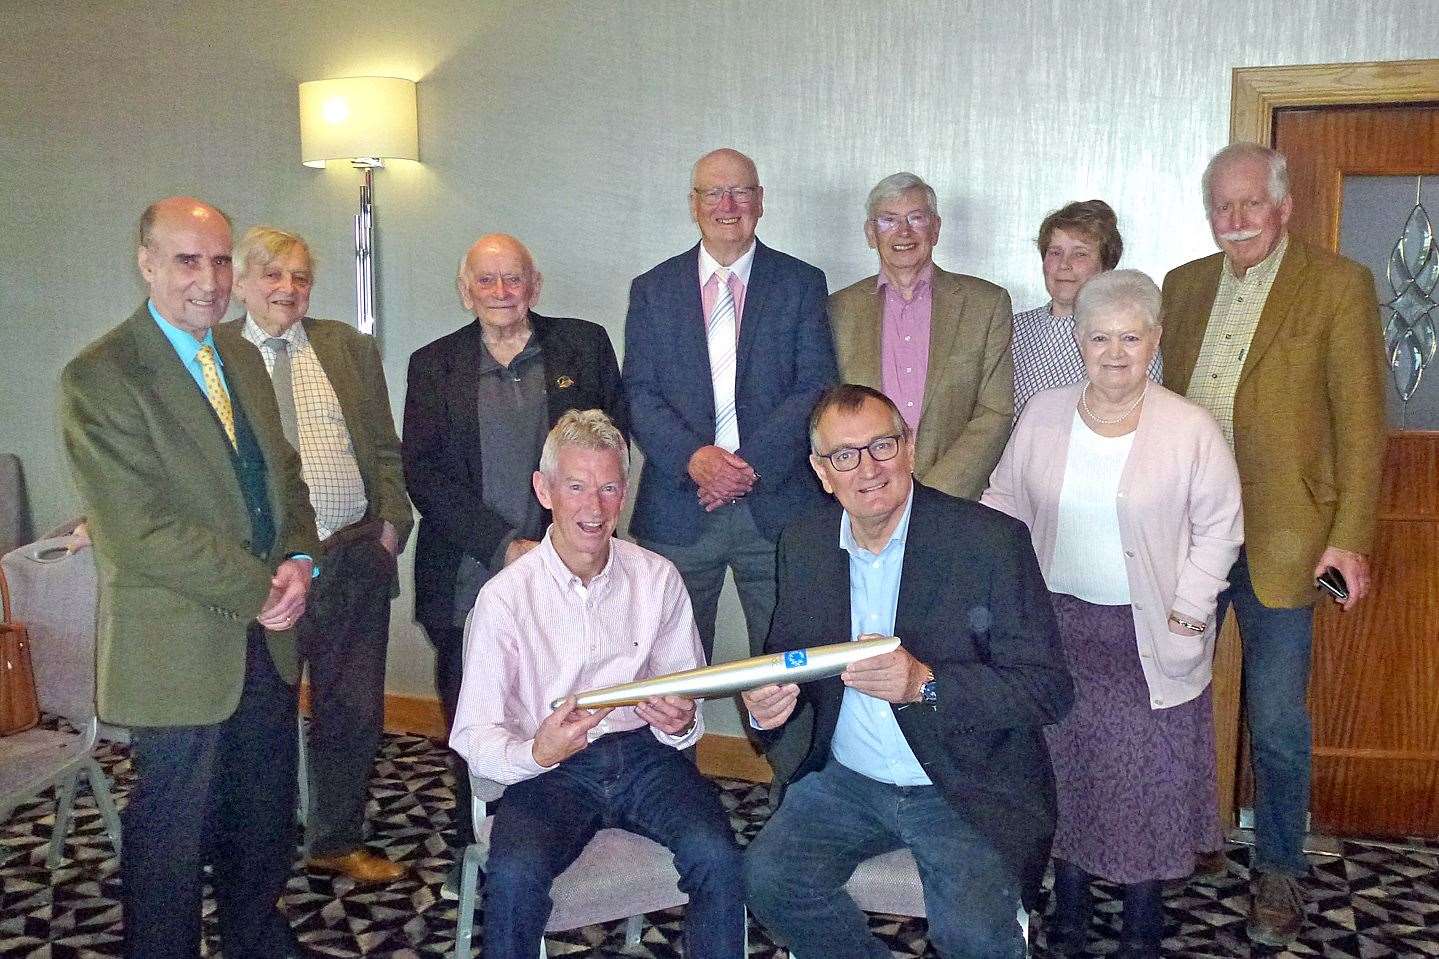 Douglas Cowie (seated left) shows one of the 2004 Olympic torches to Banff Probus Club speaker convener Eric Wilson as some of the group members gather round. Picture: Andrew Taylor